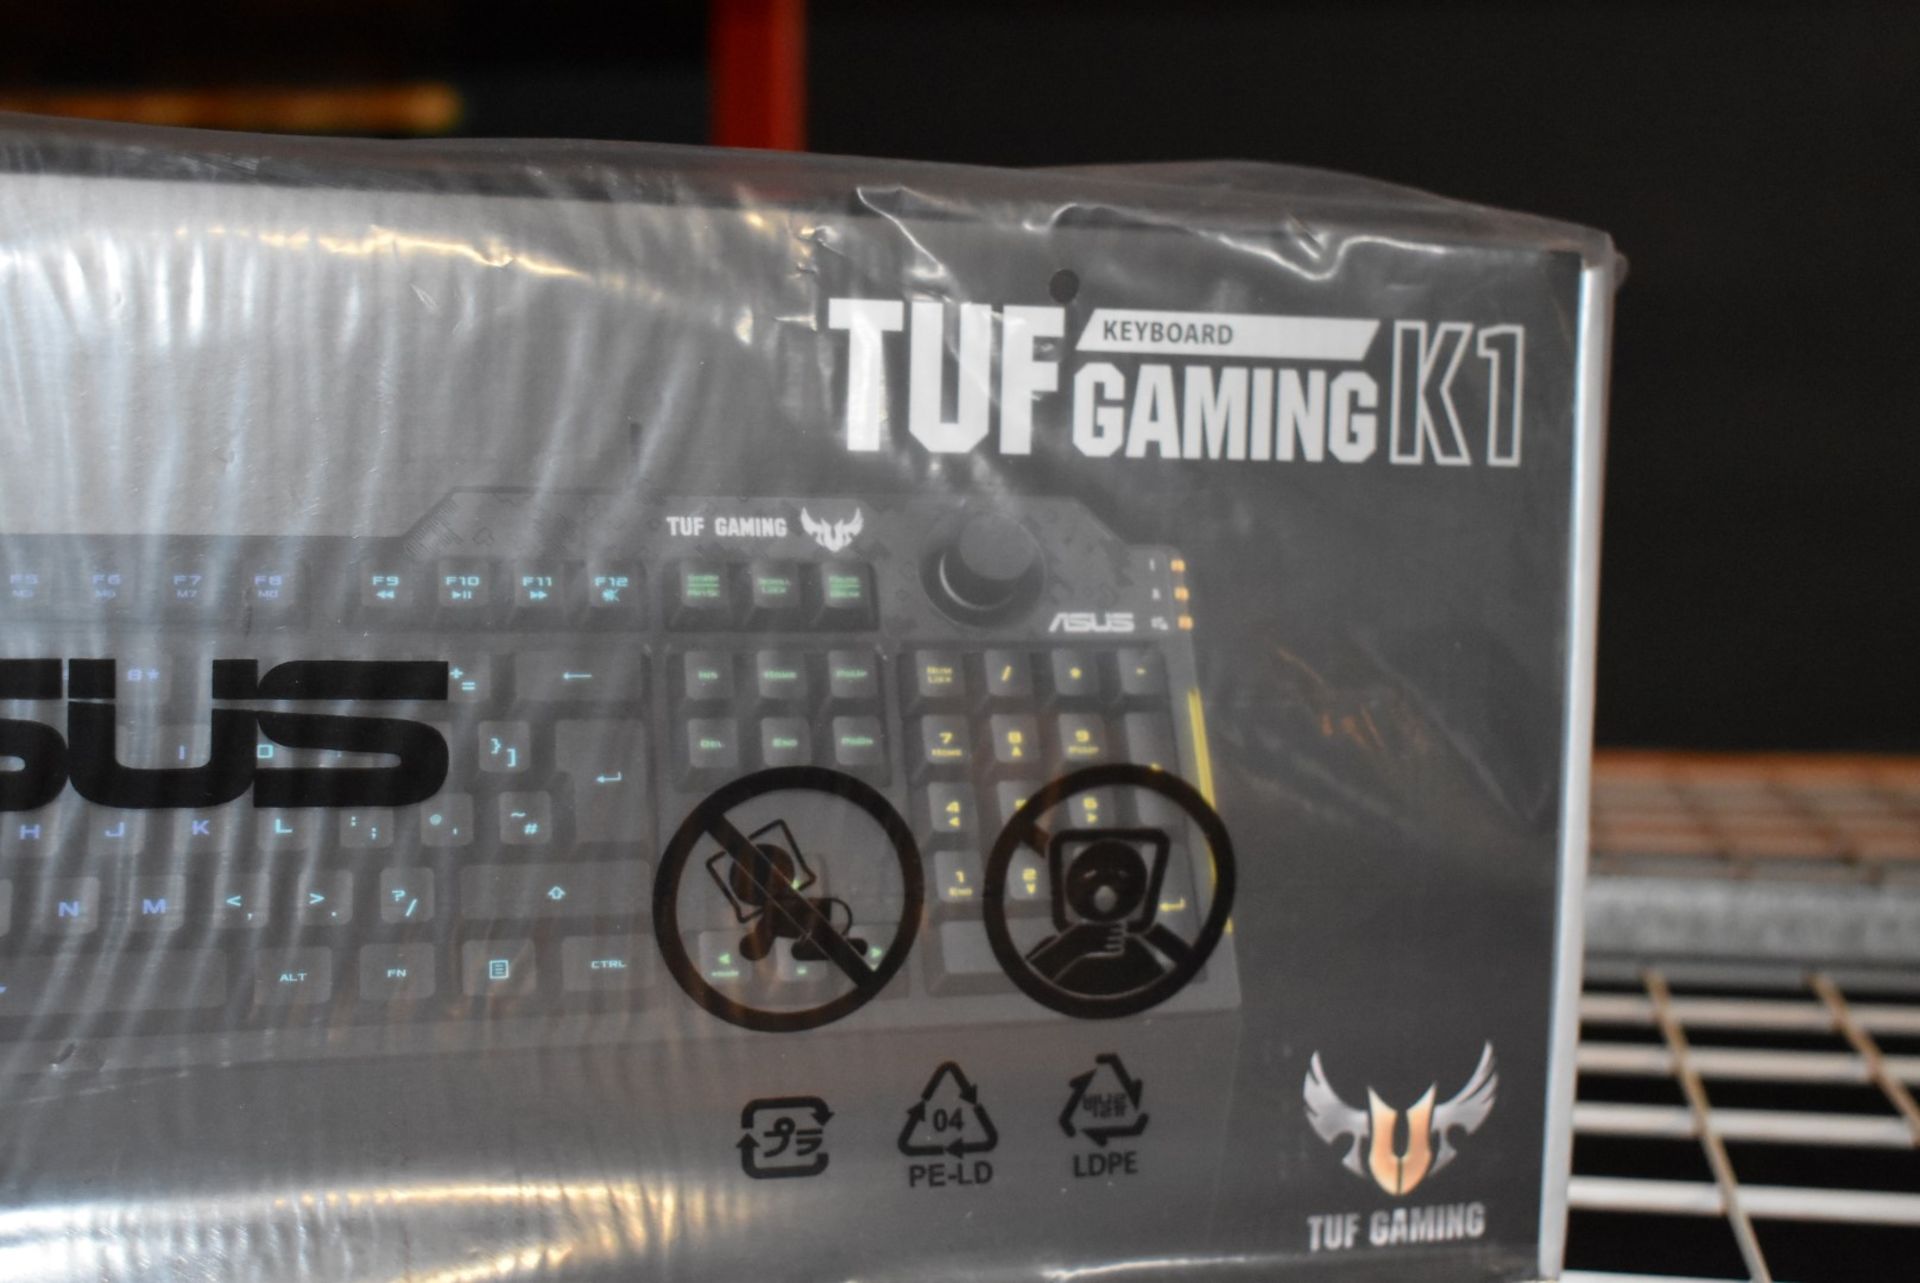 1 x Asus TUF K1 RGB Gaming Keyboard - New Boxed Stock - RRP £49.99 - Features Volume Control, Side - Image 3 of 3